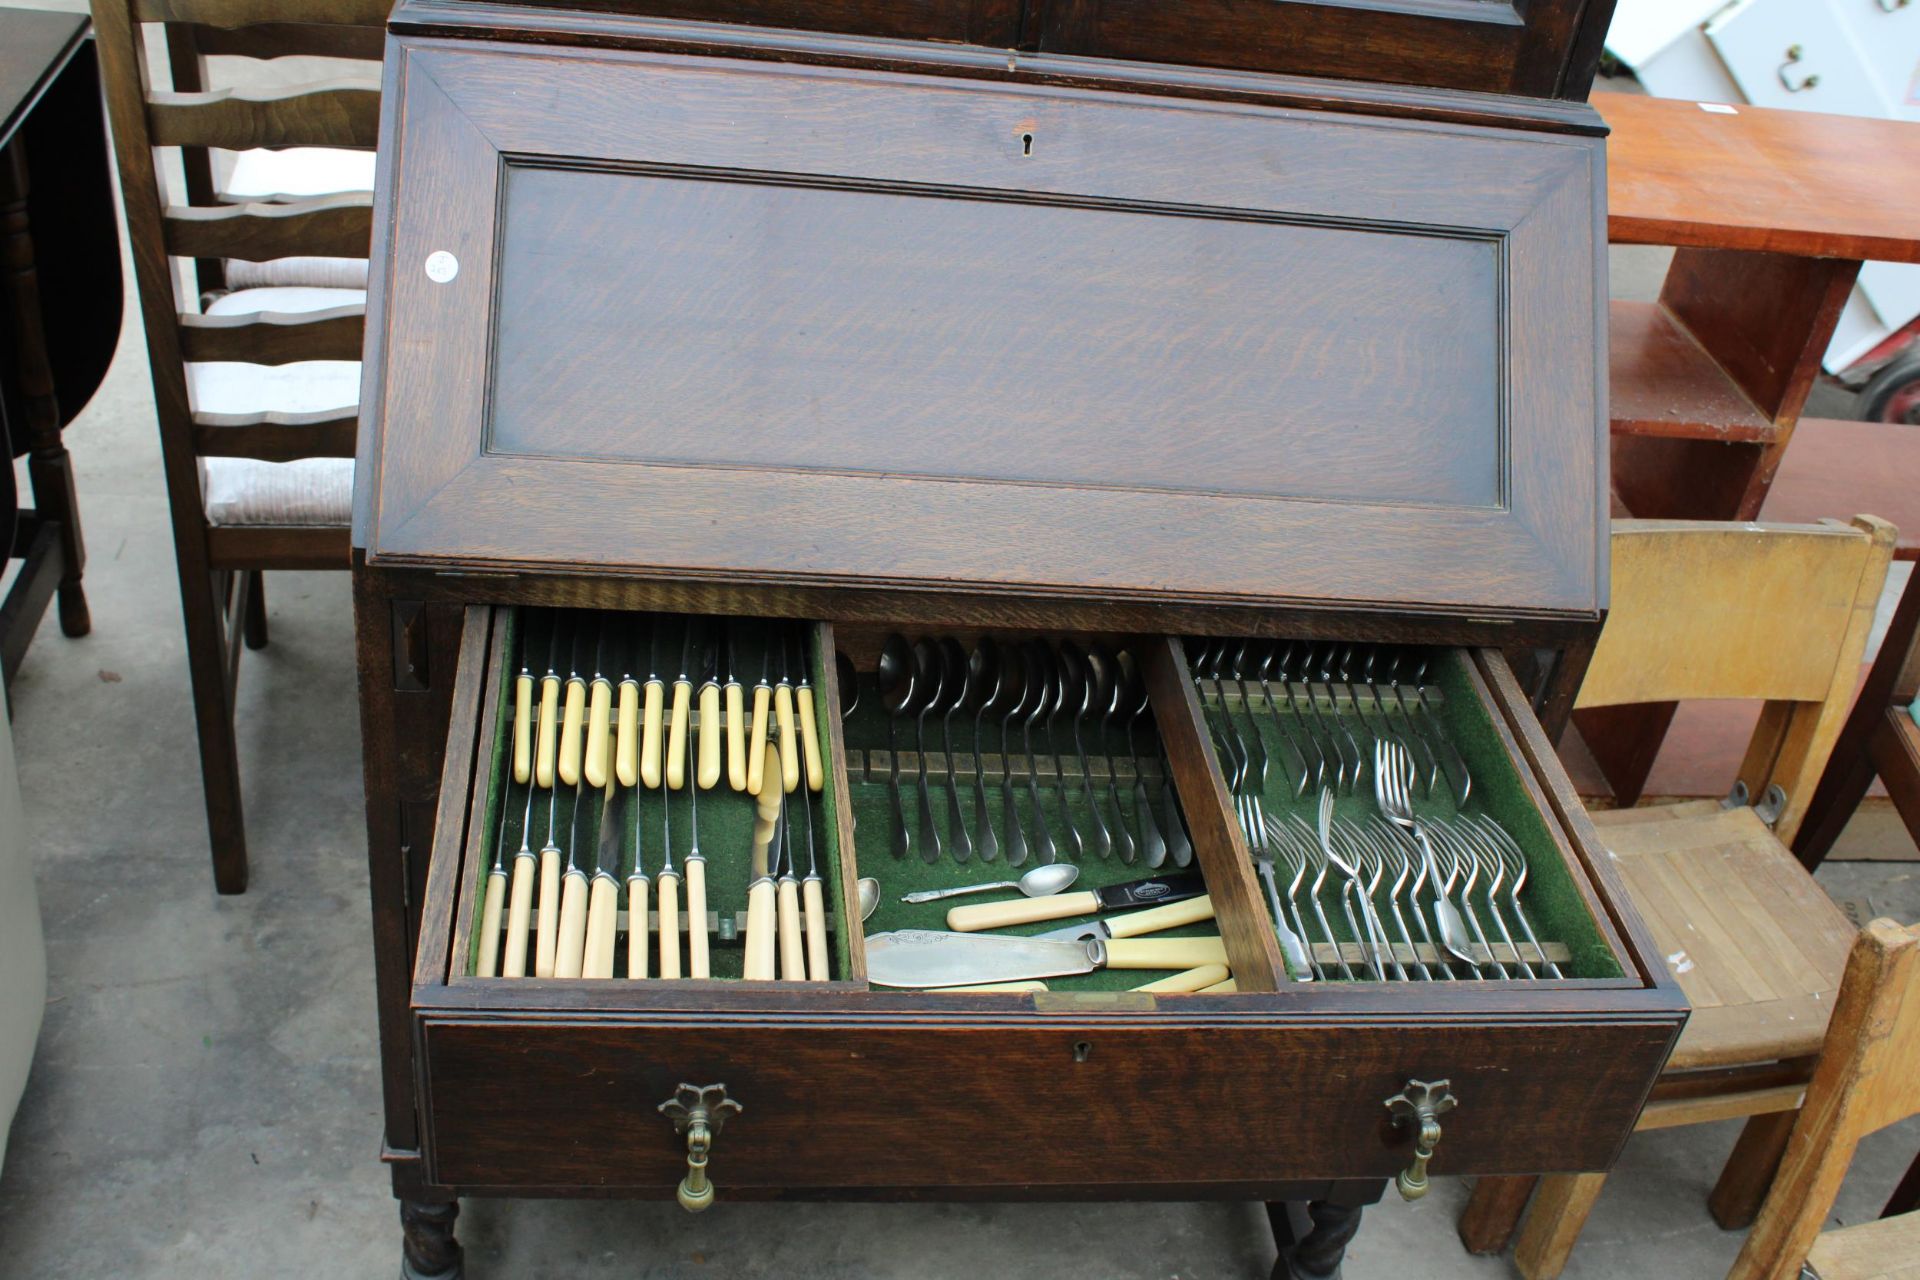 AN EARLY 20TH CENTURY OAK BUREAU BOOKCASE WITH GLAZED AND LEADED UPPER PORTION ENCLOSING CUTLERY - Image 4 of 7